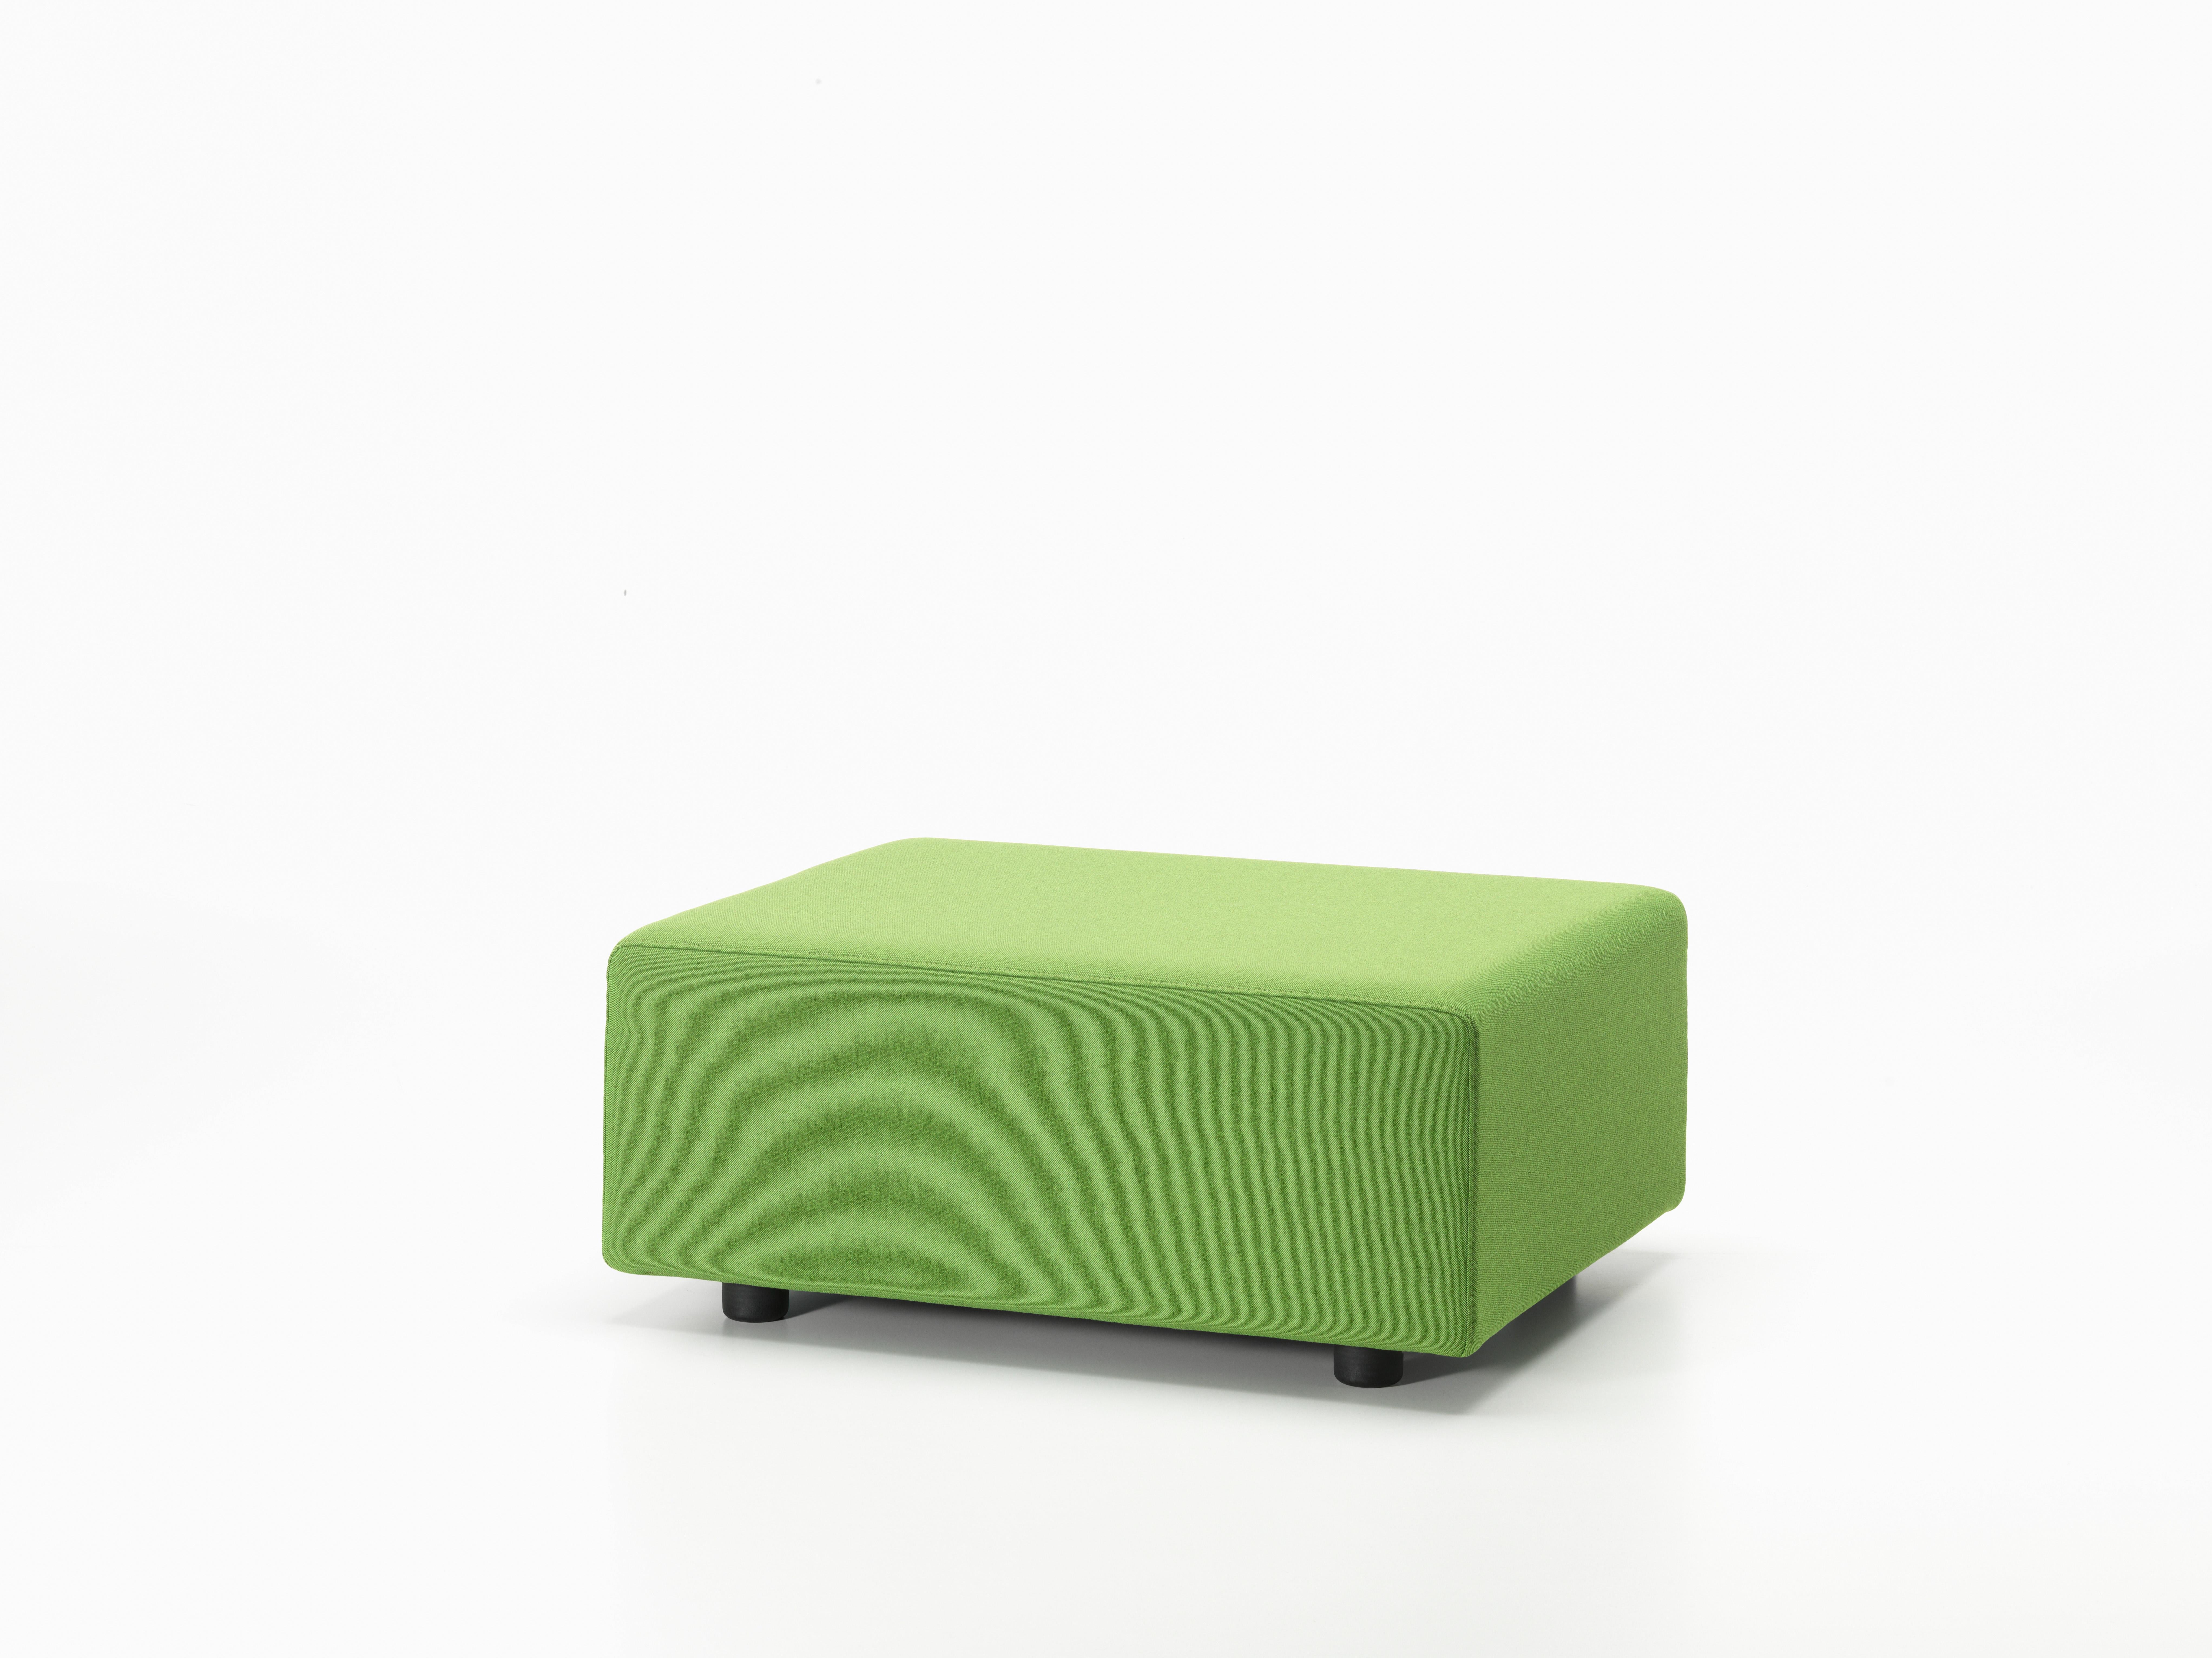 These items are currently only available in the United States.

The ottoman is a flexible element that can be optionally used as a side platform to extend the horizontal surface of the Polder Sofa. Positioned perpendicular to the sofa, it forms a